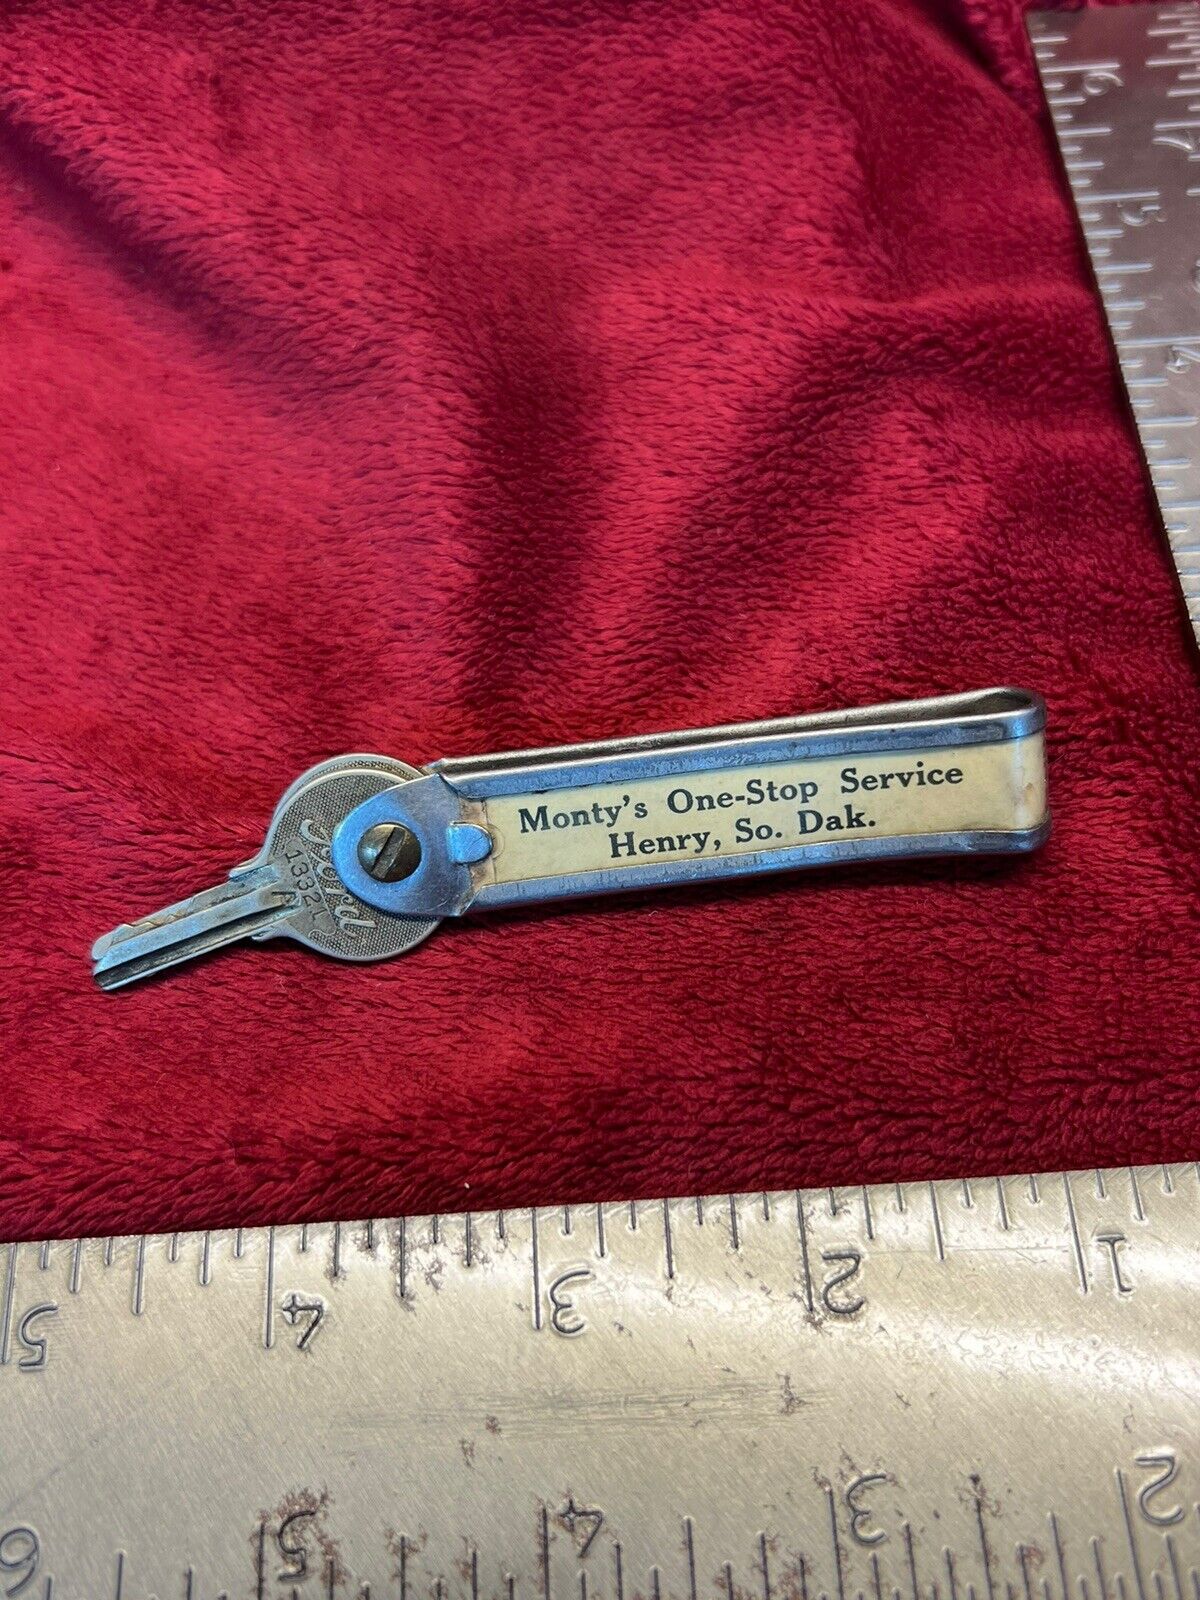 Vintage Metal Key Fob, Monty’s One-Stop Service in Henry, SD & 2 Old Ford Keys